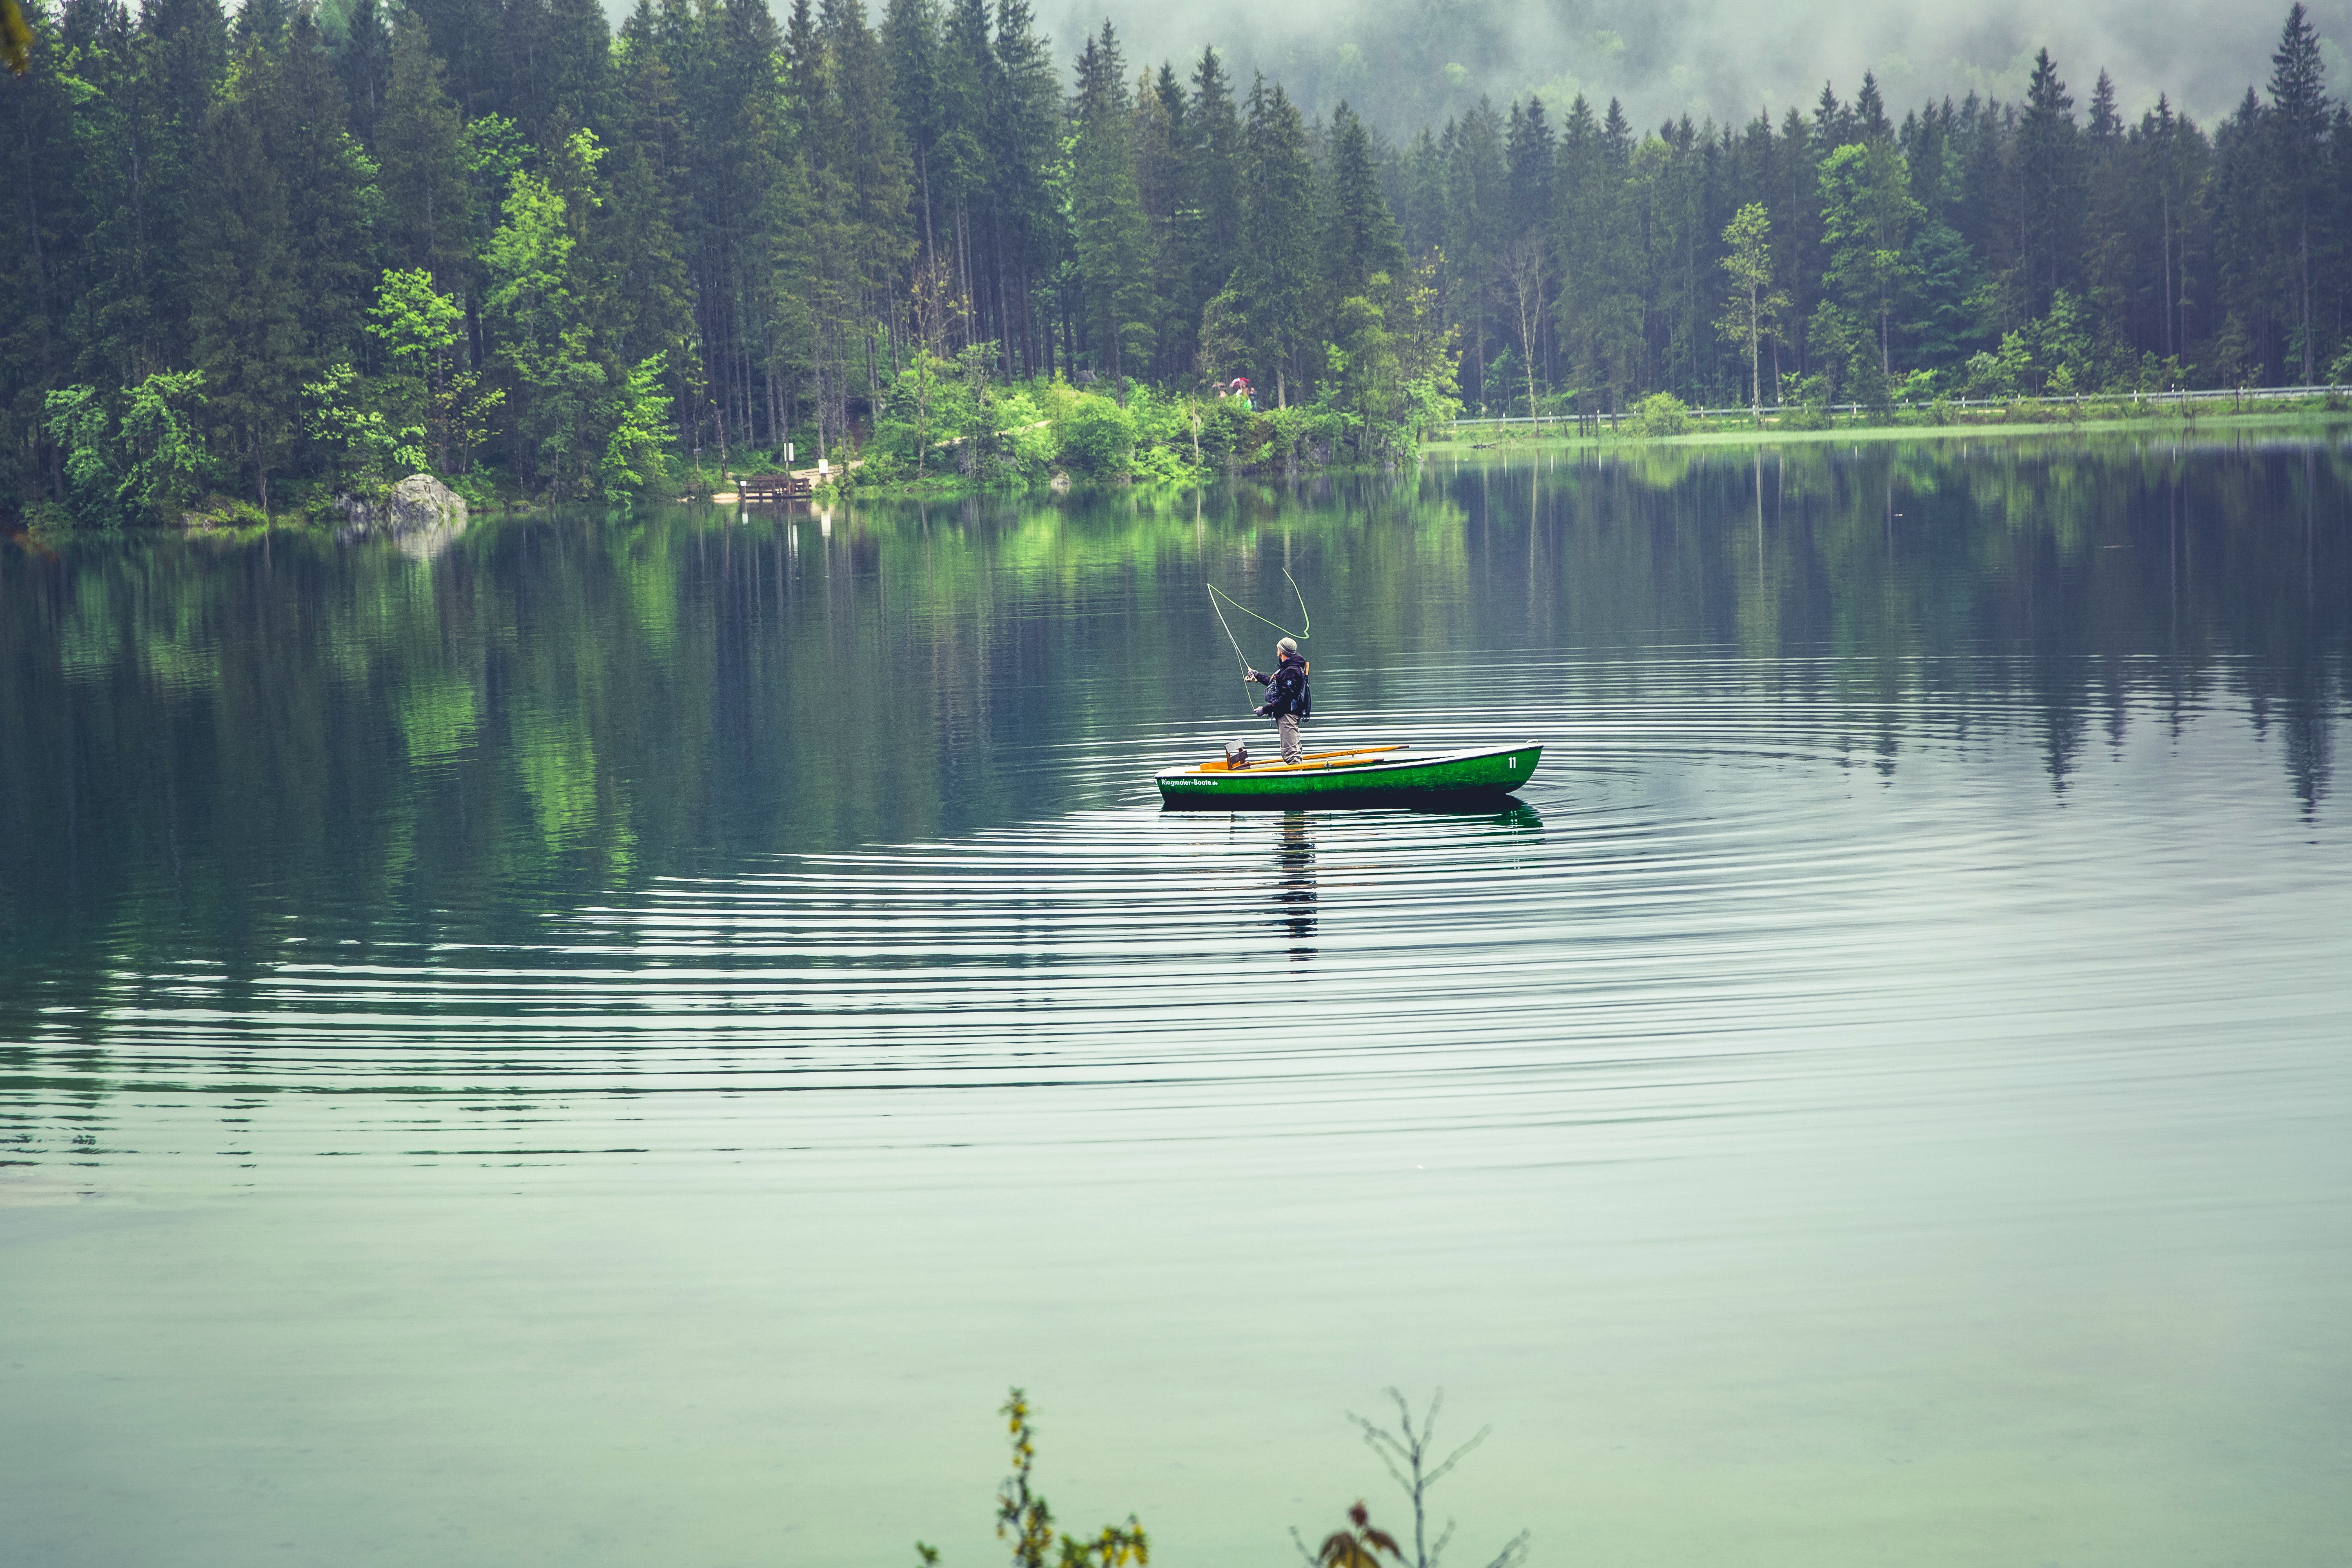 Person on Green Boat Fishing on Body of Water, Boat, Fisherman, Fishing, Forest, HQ Photo